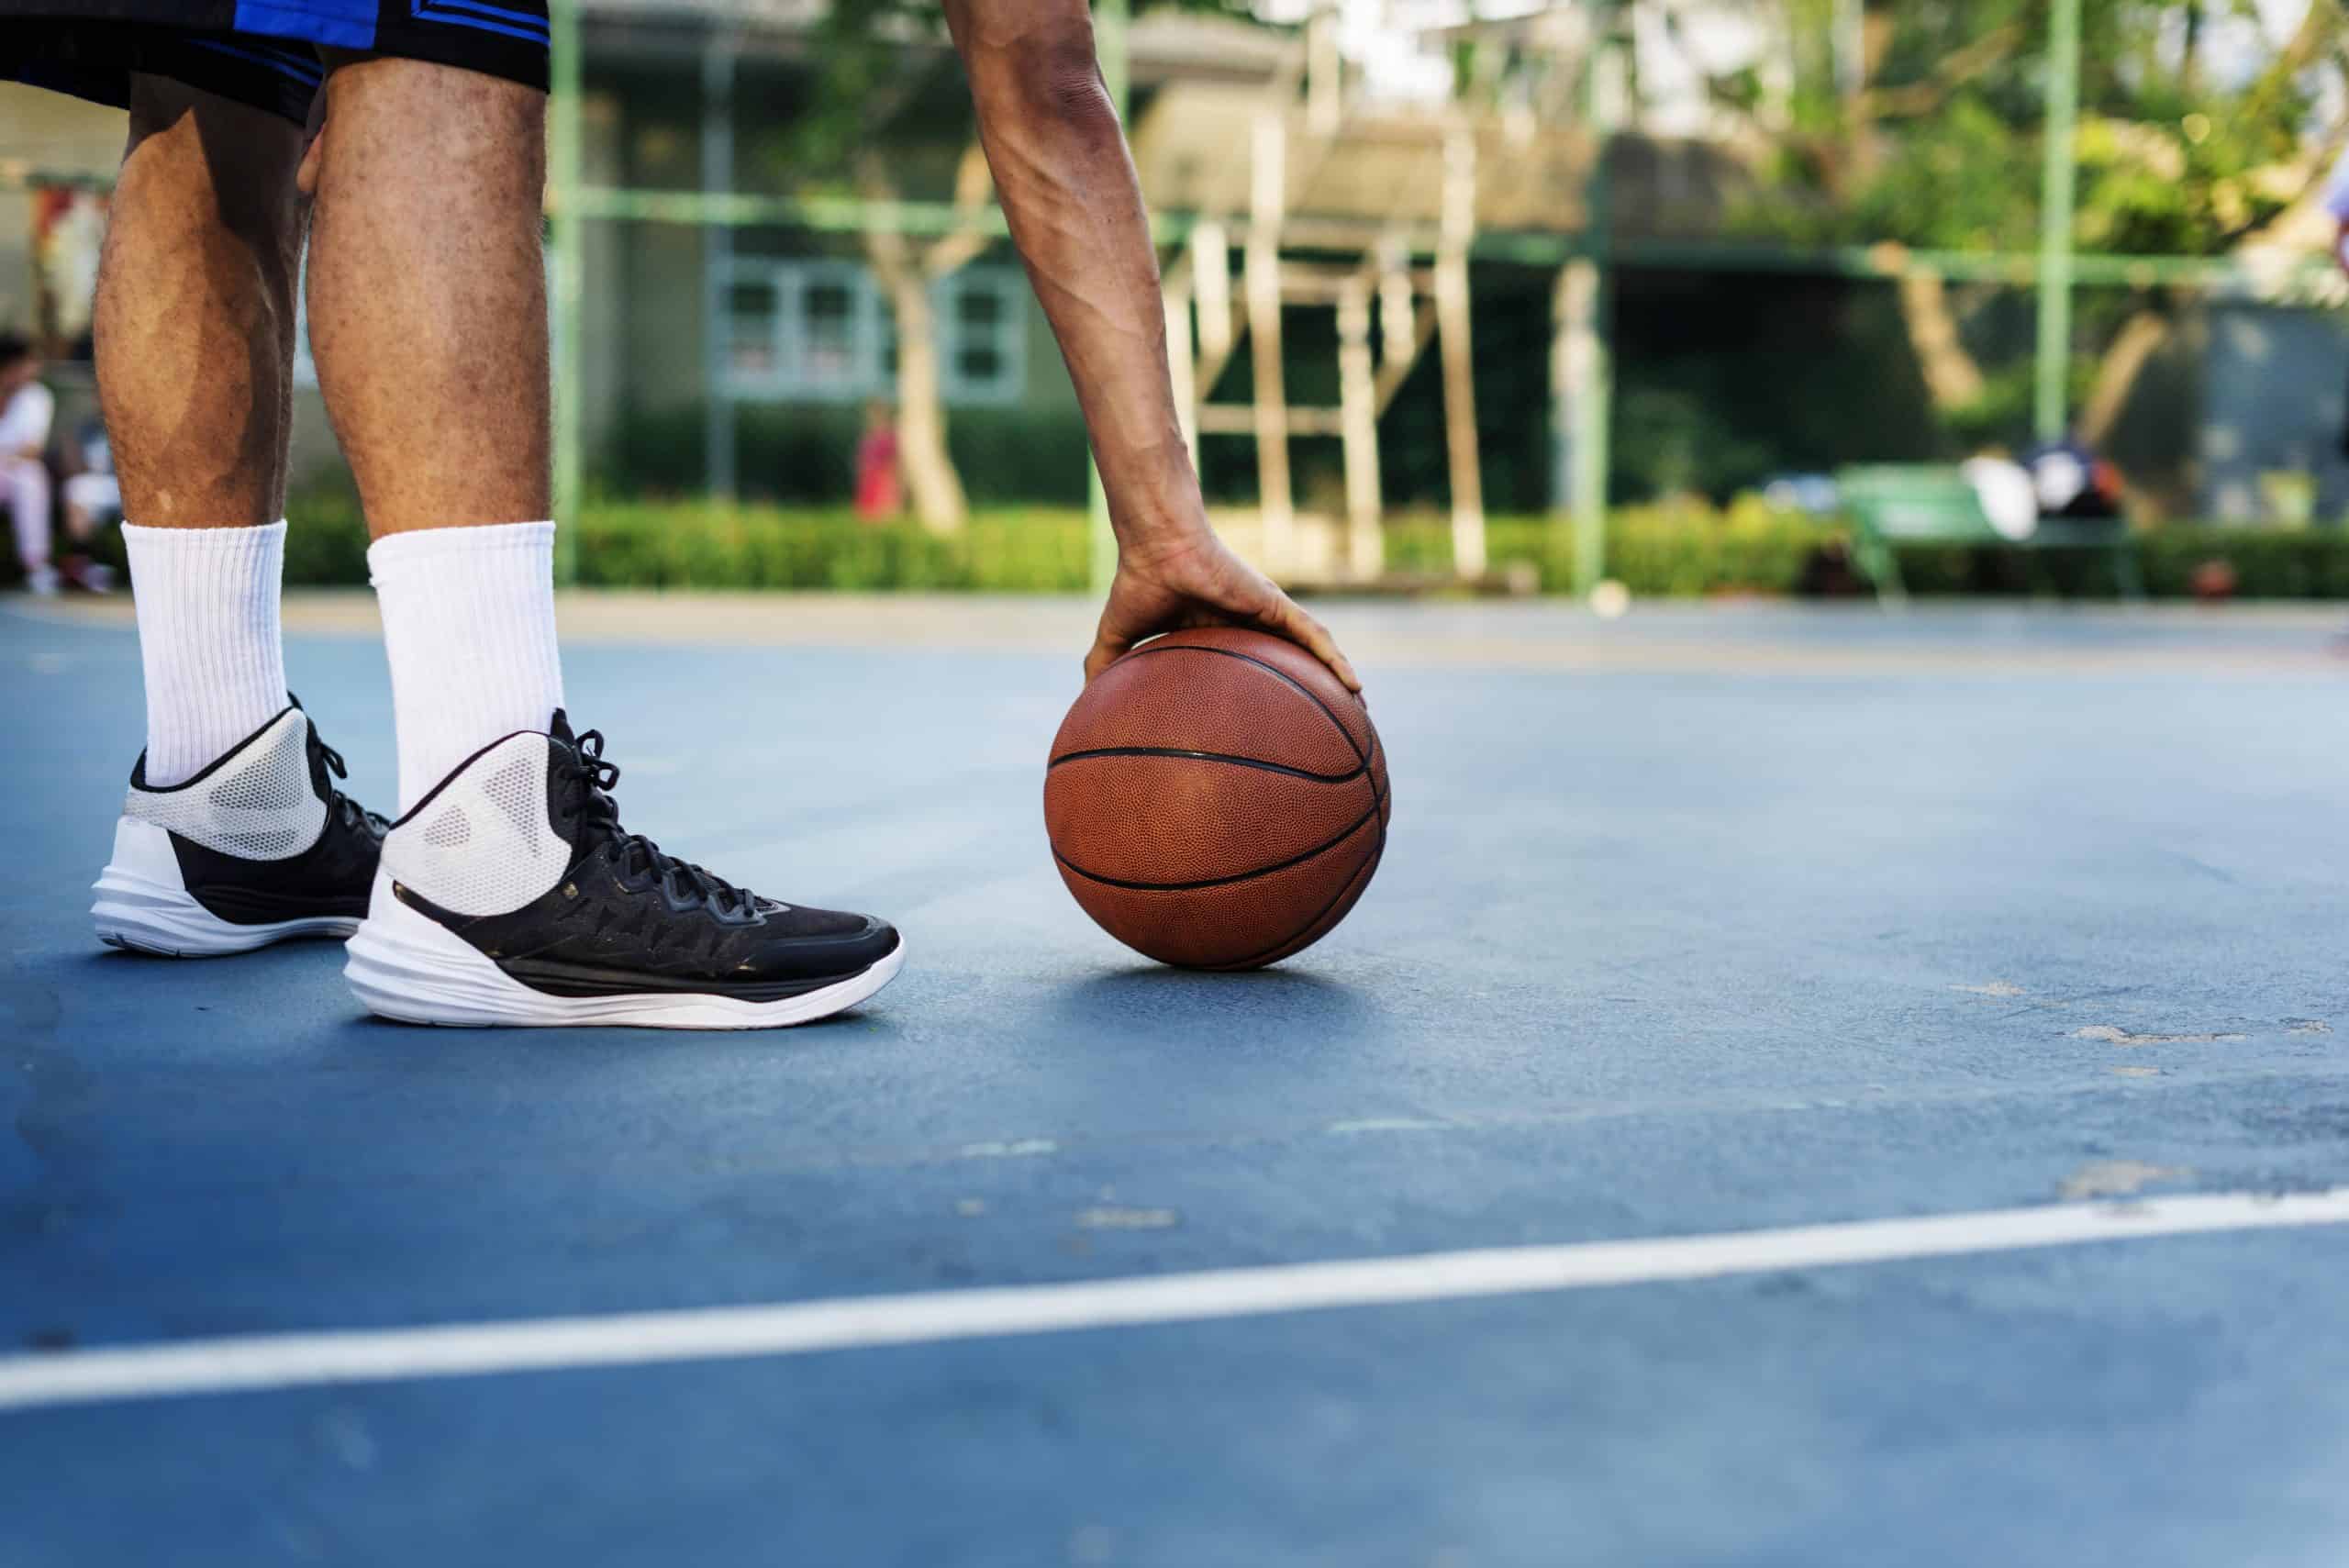 Choosing professional basketball shoes – which parameters matter most?